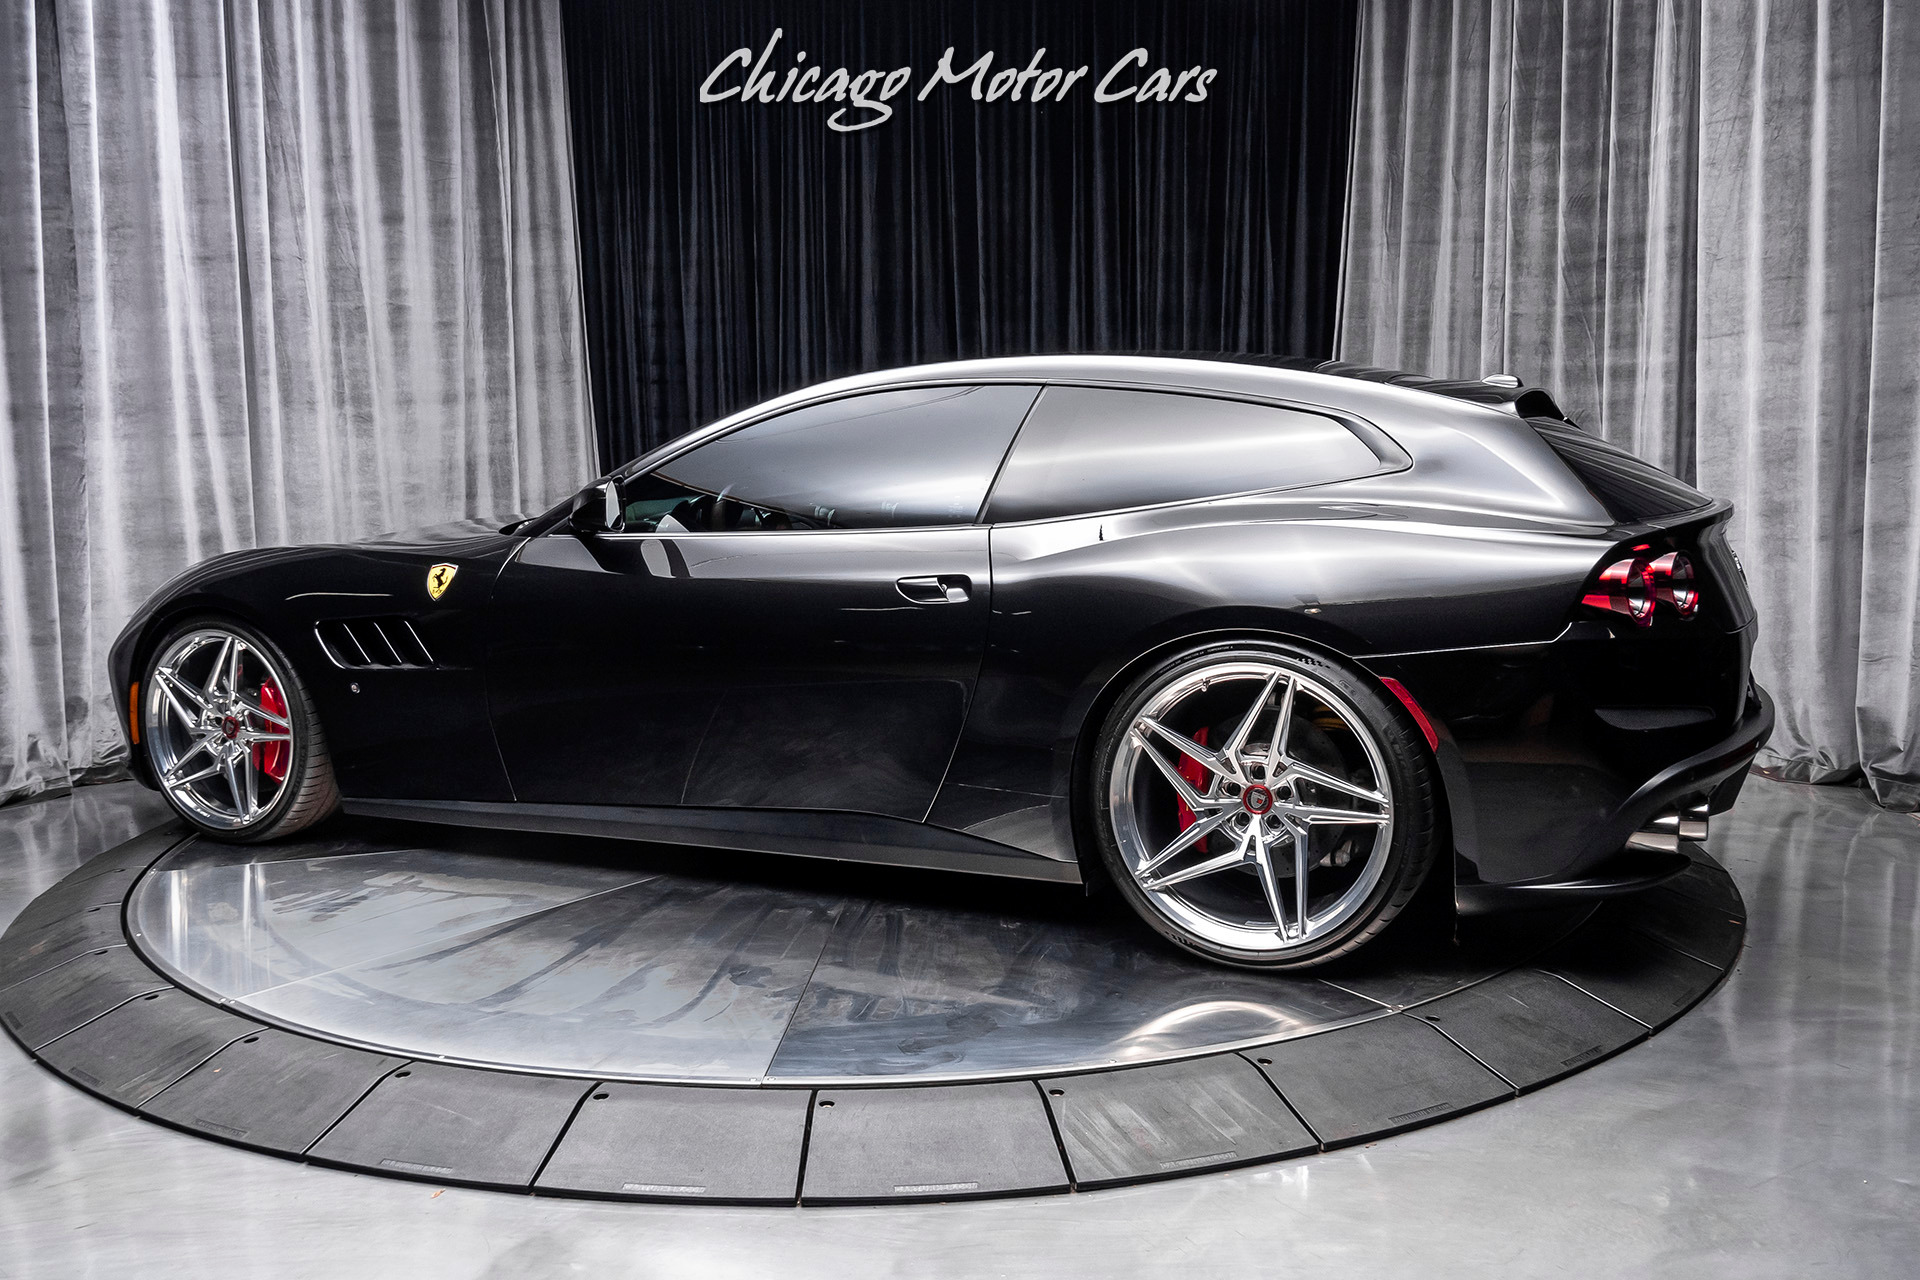 Used-2018-Ferrari-GTC4Lusso-T-Only-9400-Miles-Highly-Optioned-UPGRADES